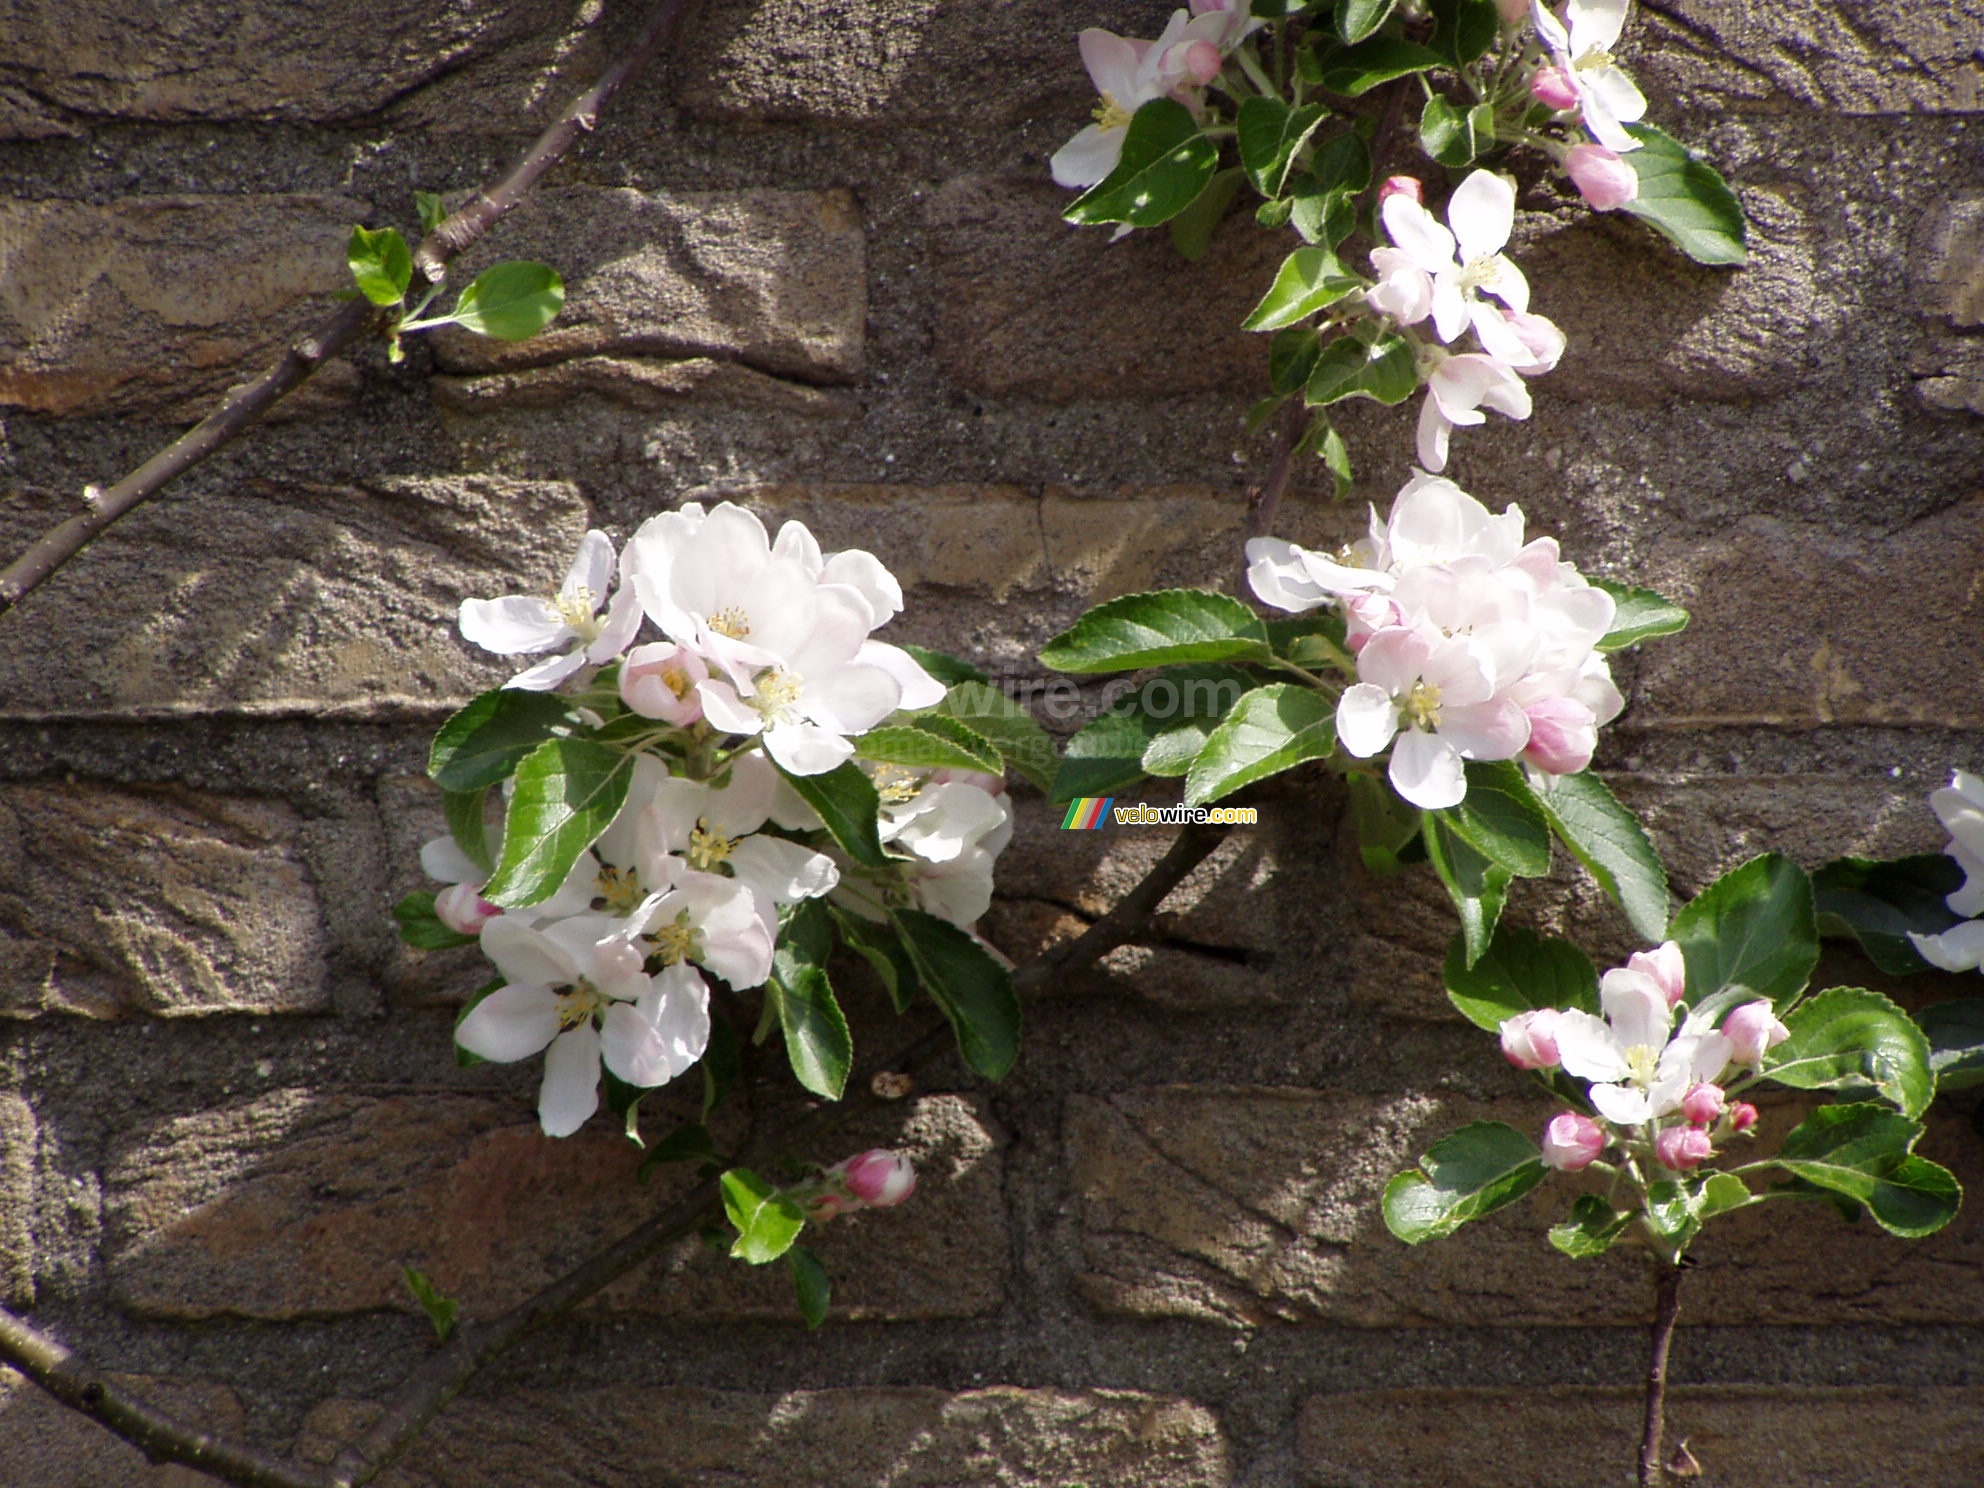 Blossom in the apple tree